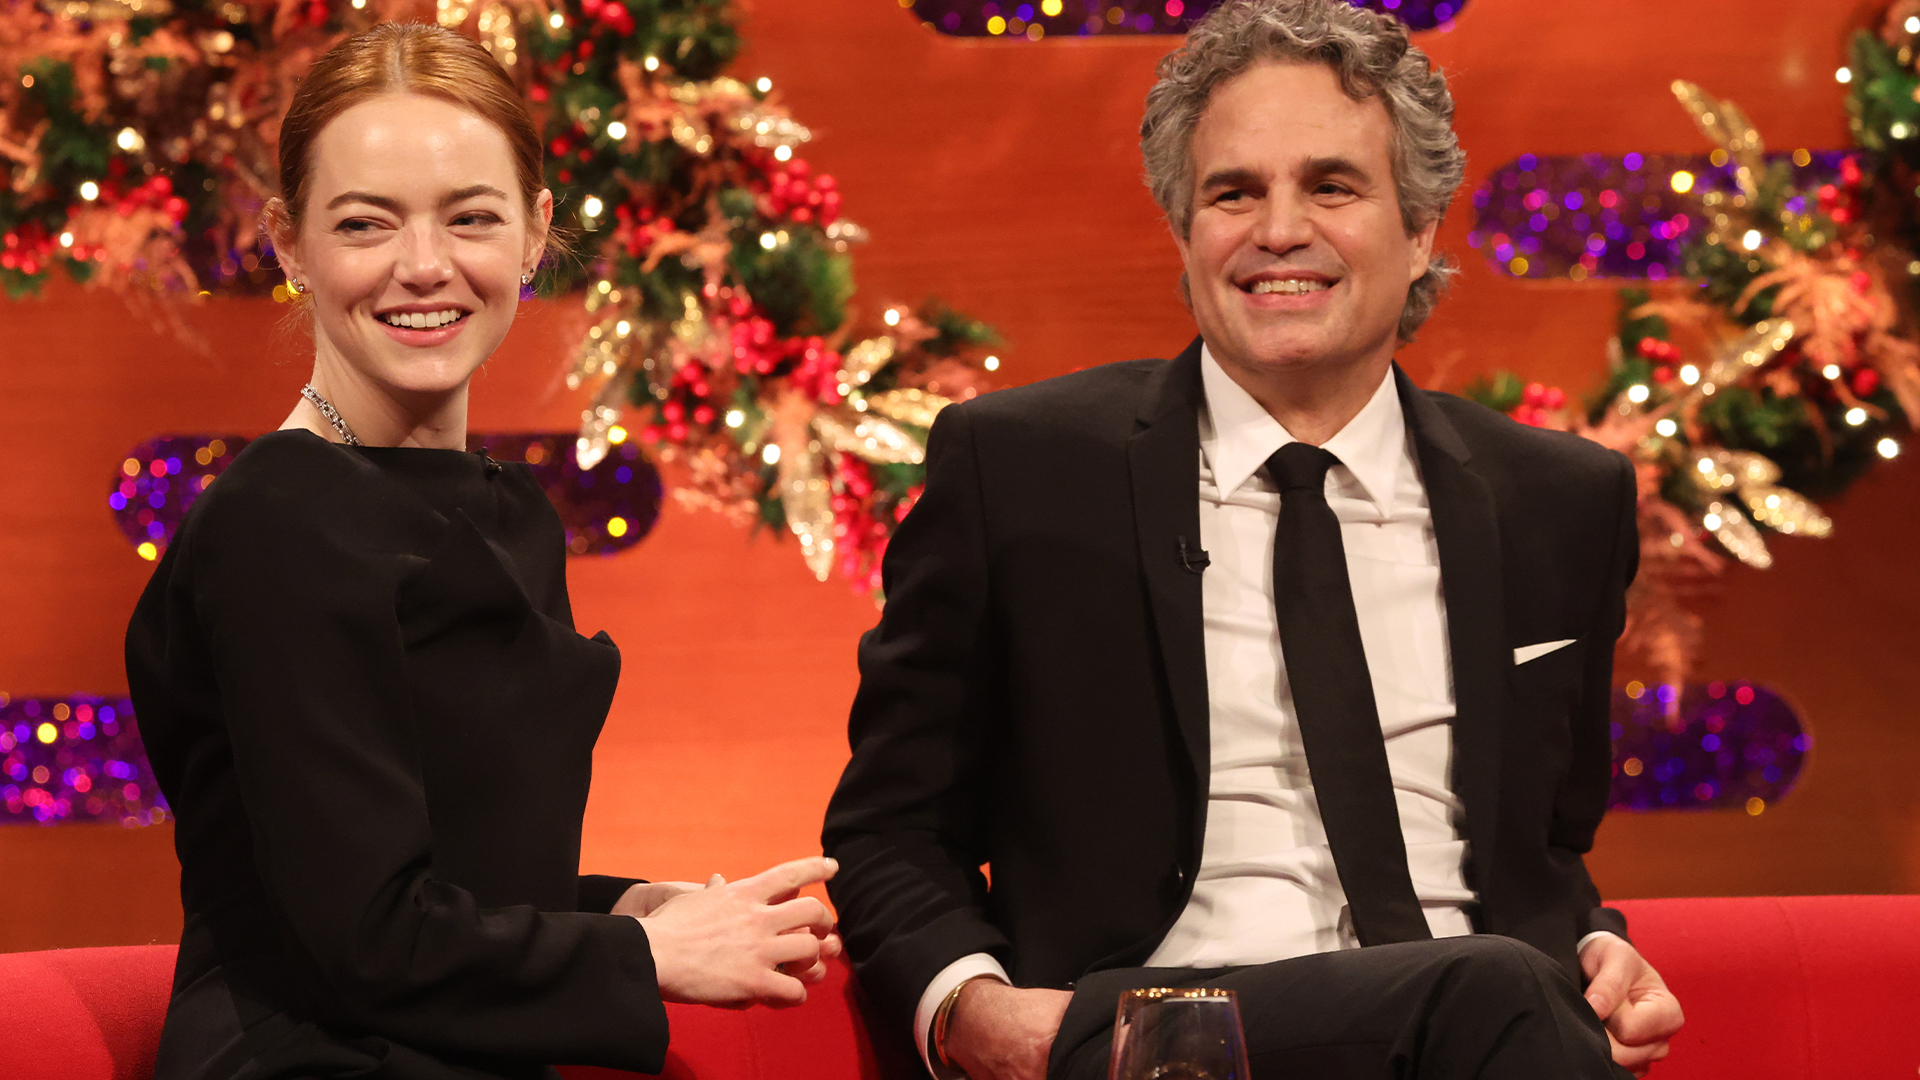 The Graham Norton Show Season 31 Episode 99 - New Year's Eve Special